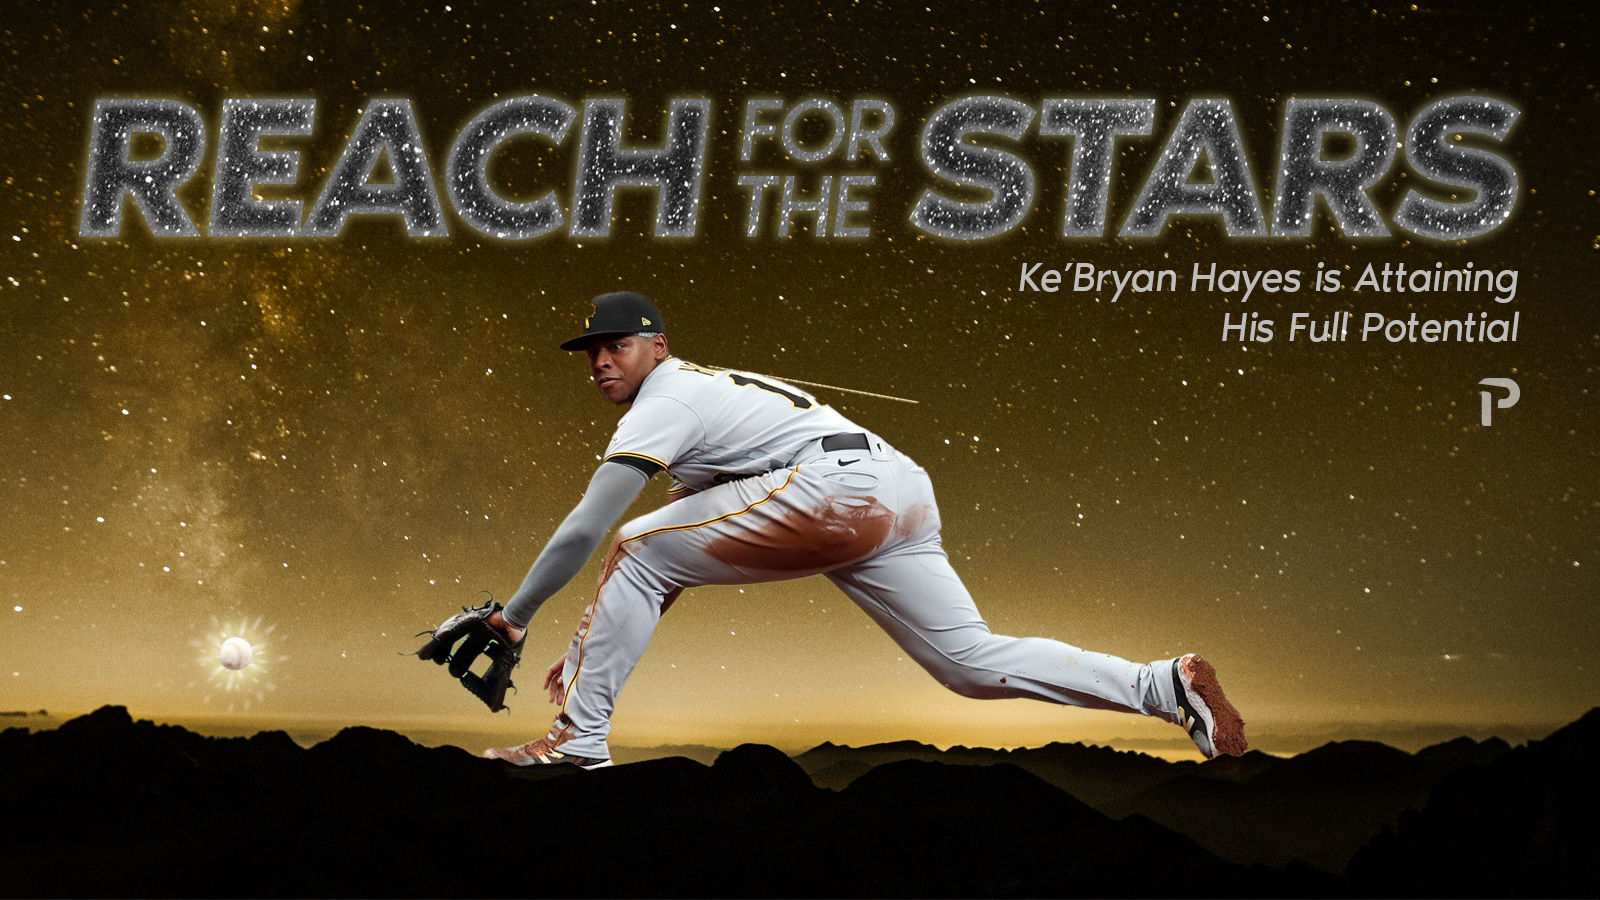 Reach for the Stars: Ke'Bryan Hayes is Attaining His Full Potential